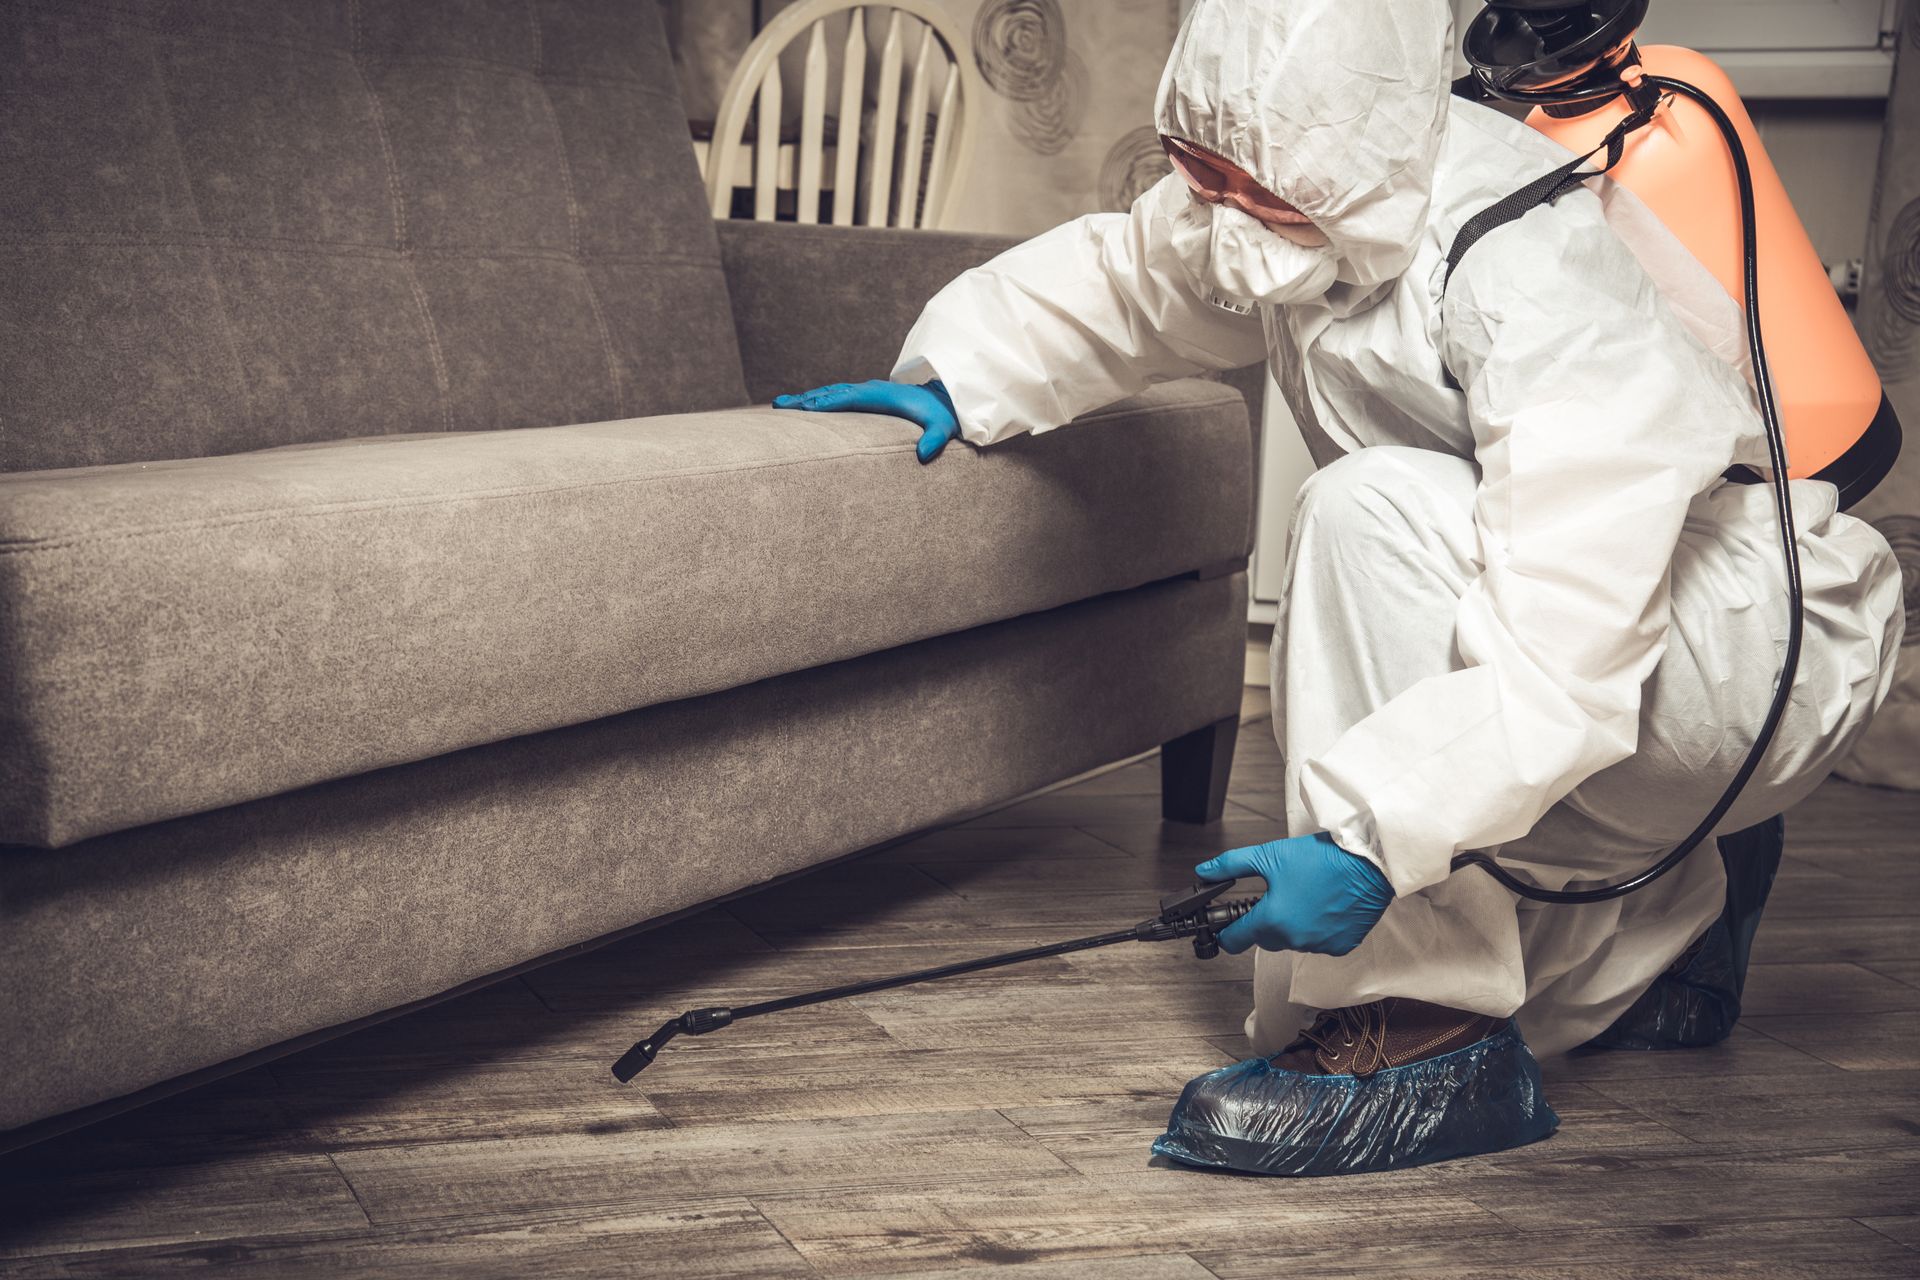 A man in a protective suit is spraying a couch with a sprayer.